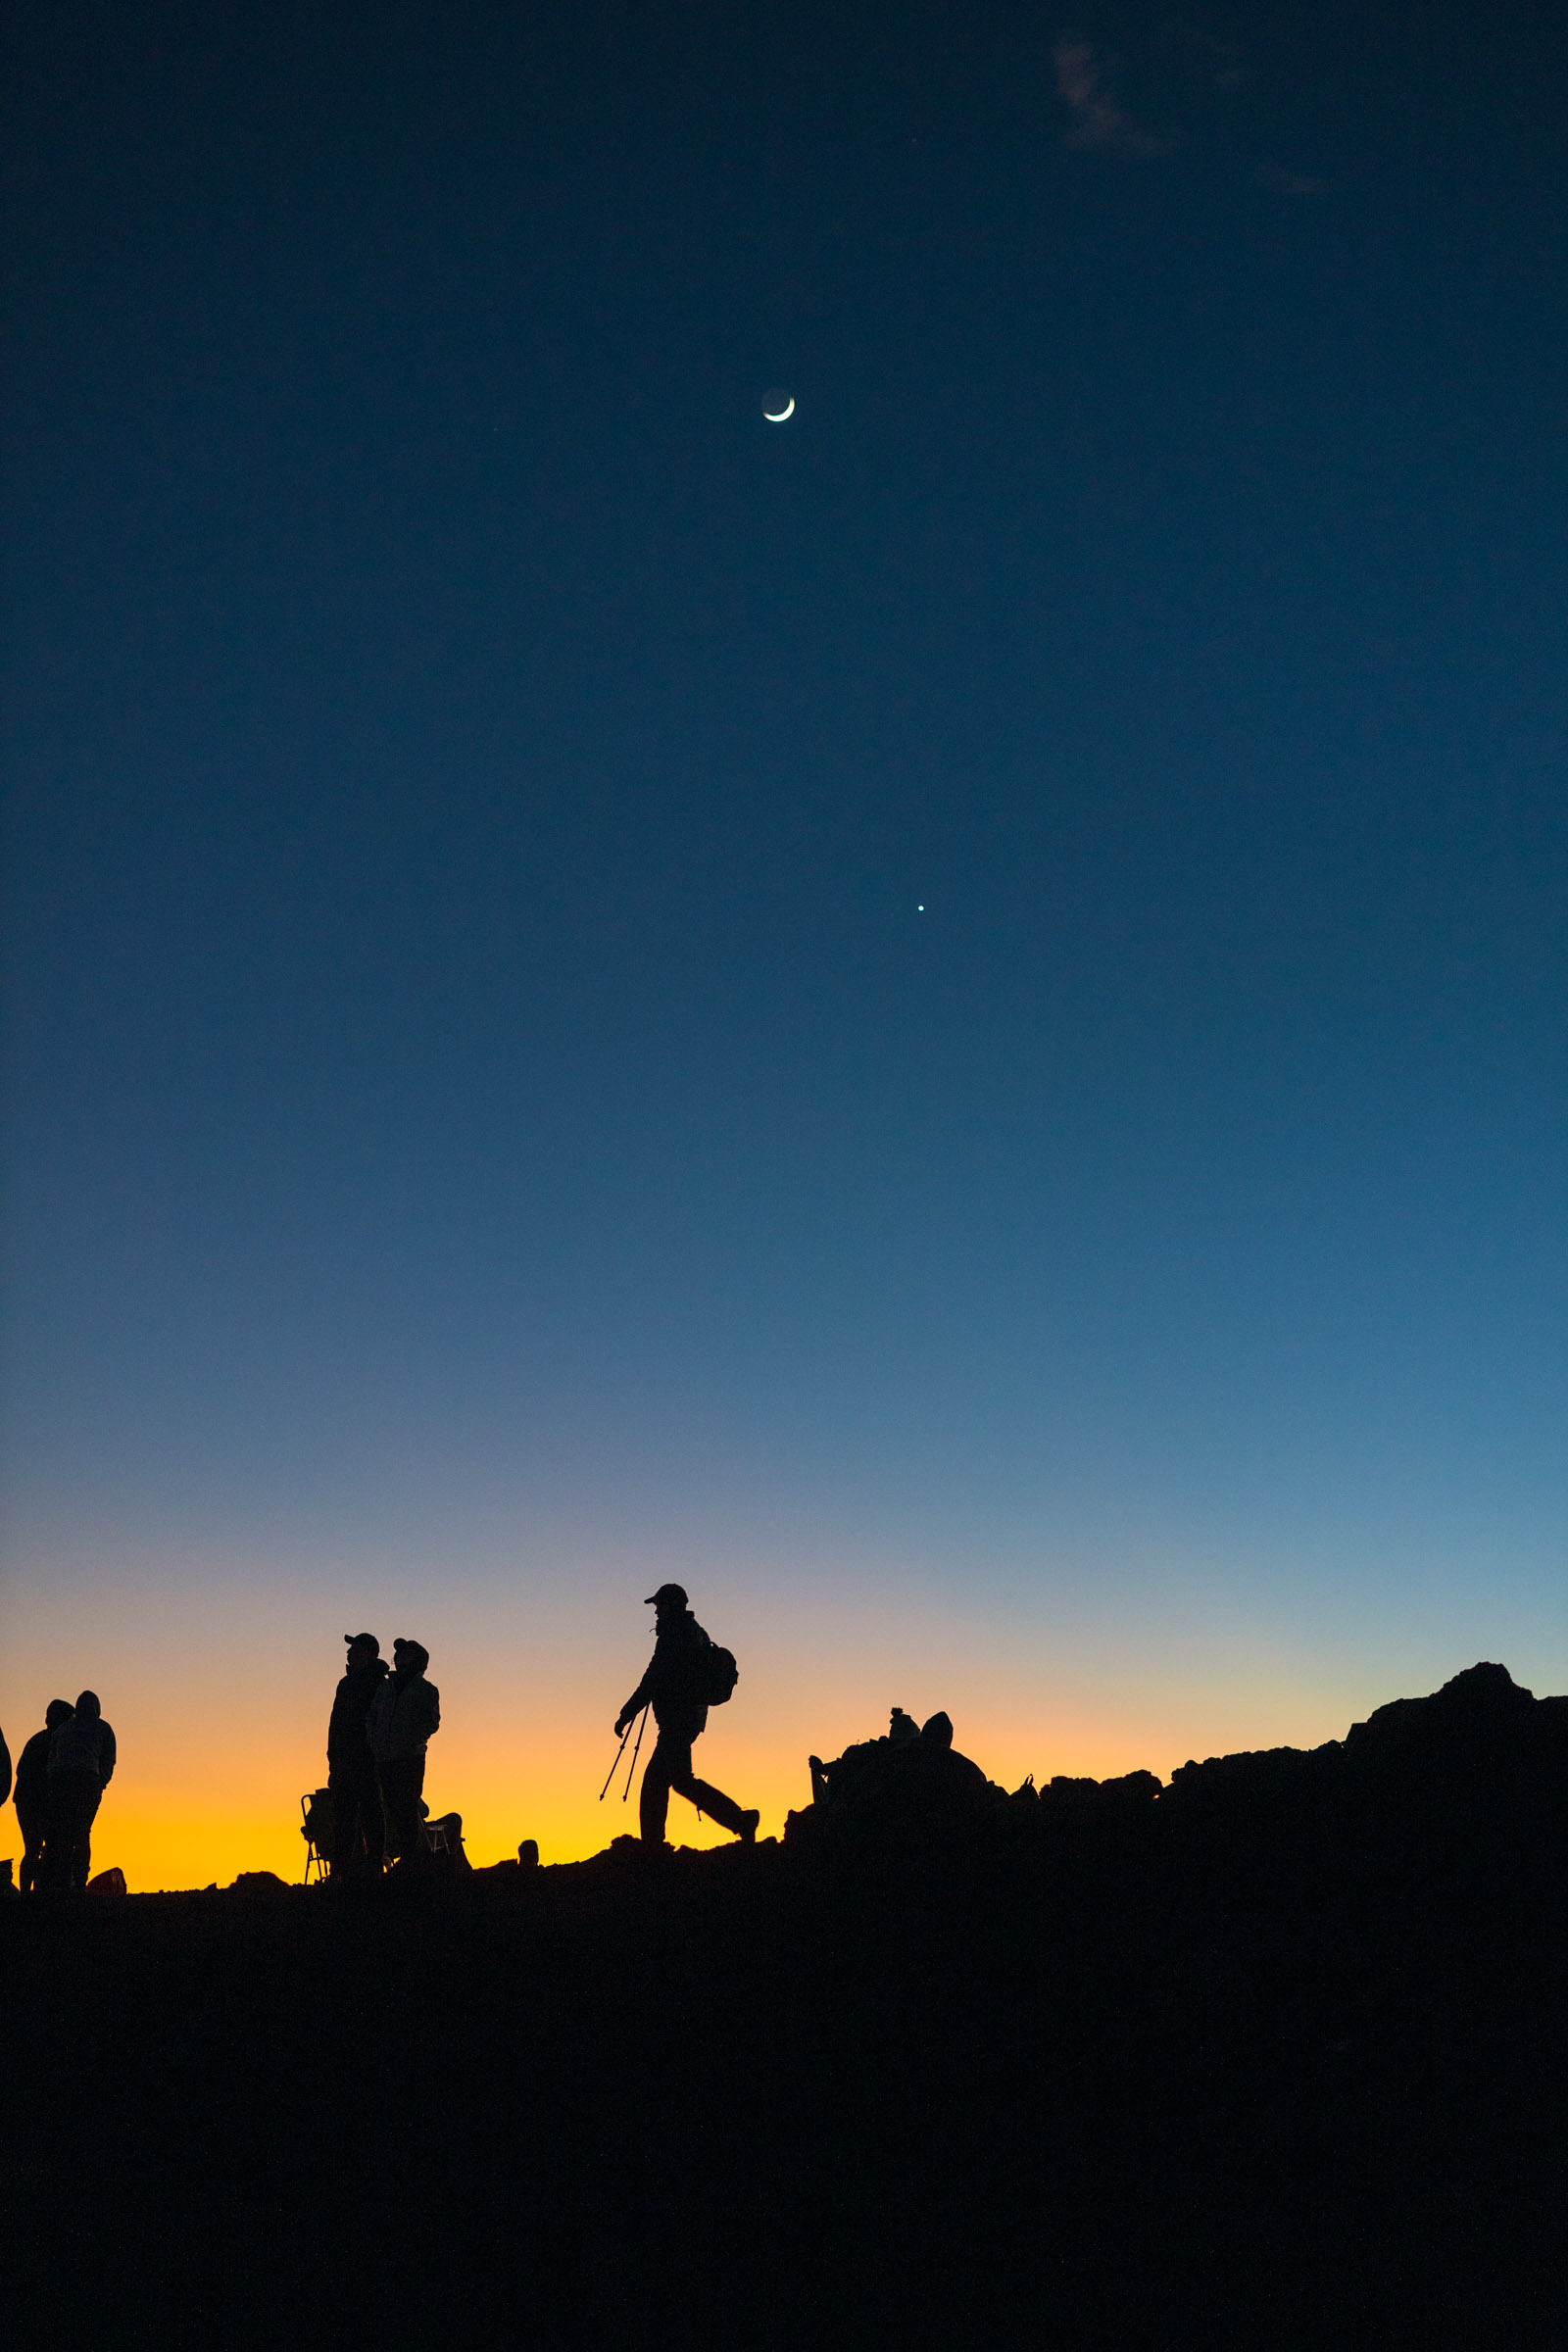 Hikers silhouetted in front of the moon